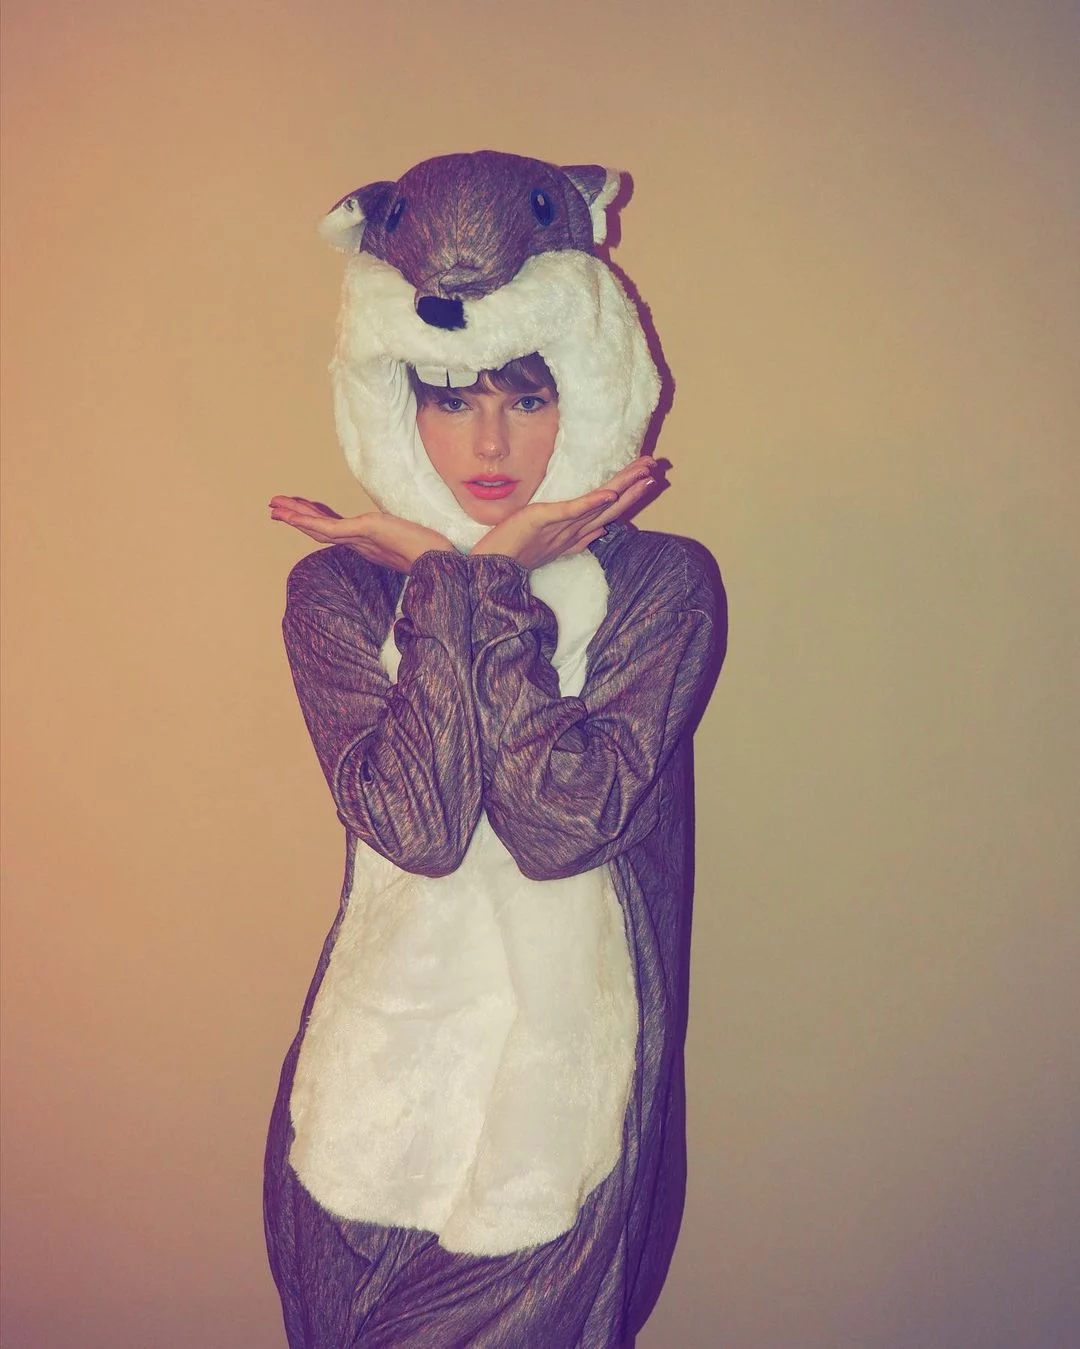 Taylor wearing a squirrel costume.